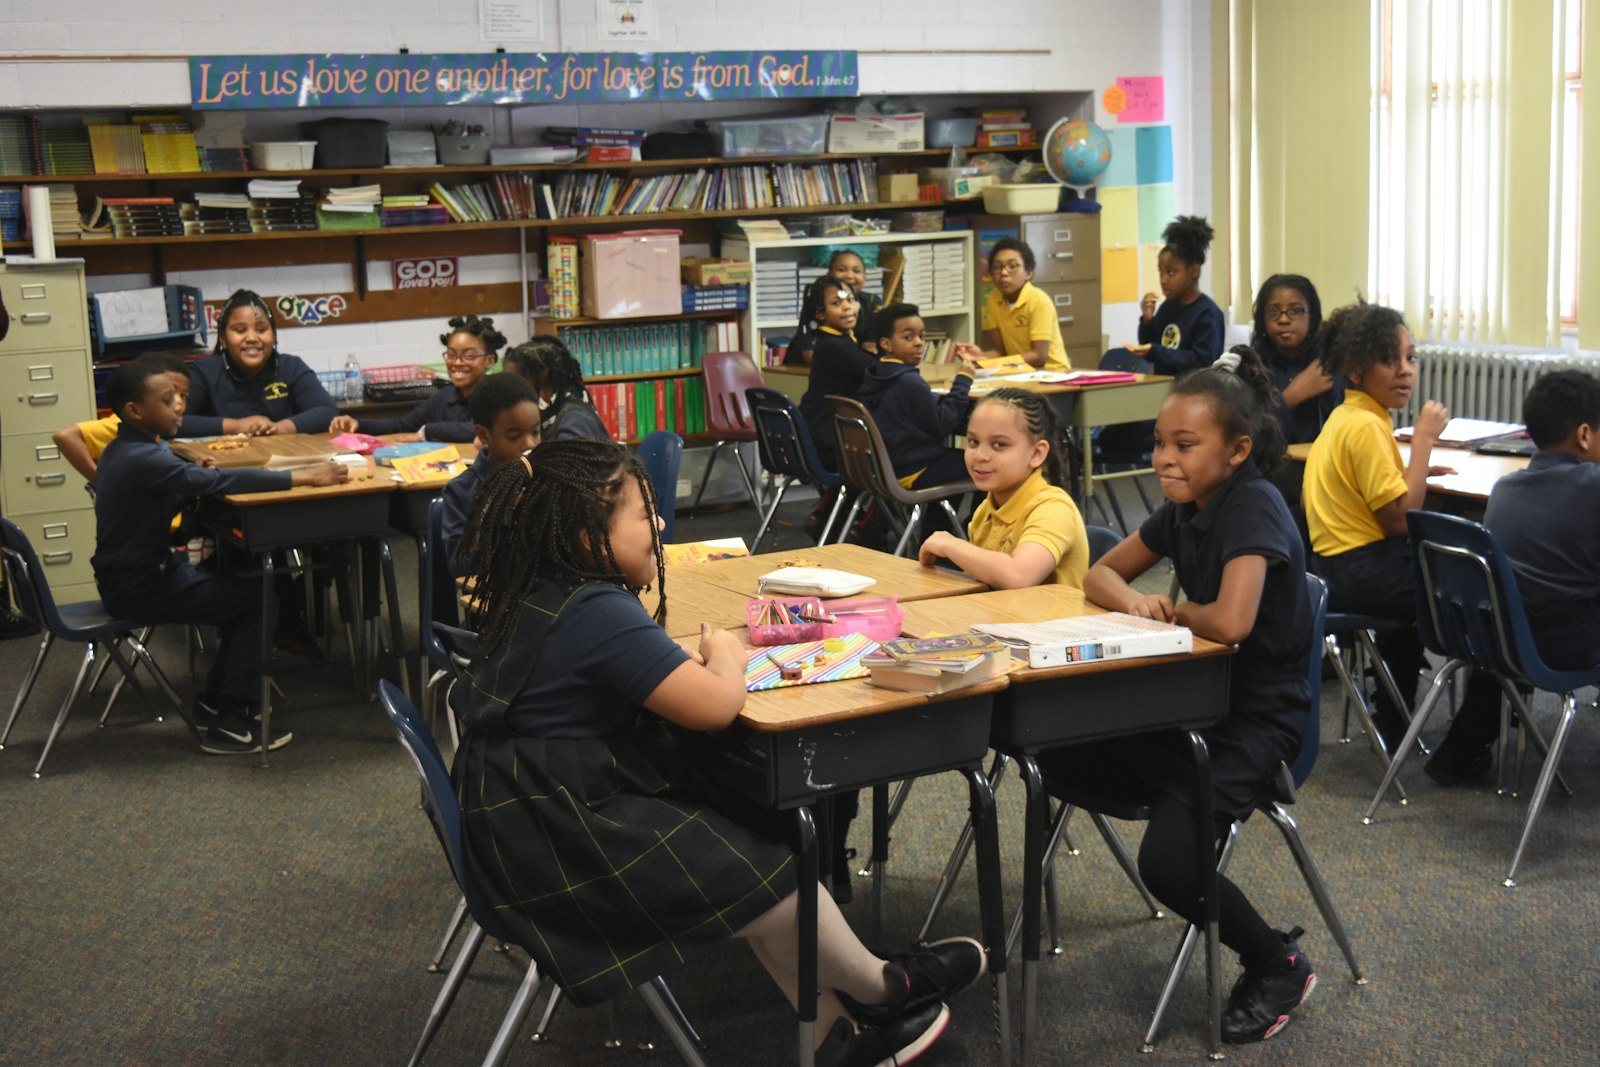 Students attend class at Christ the King School in this file photo. As one of four remaining Catholic elementary schools in the city, Christ the King offers catechesis and a quality education for underserved families, Fr. Djonovic said.